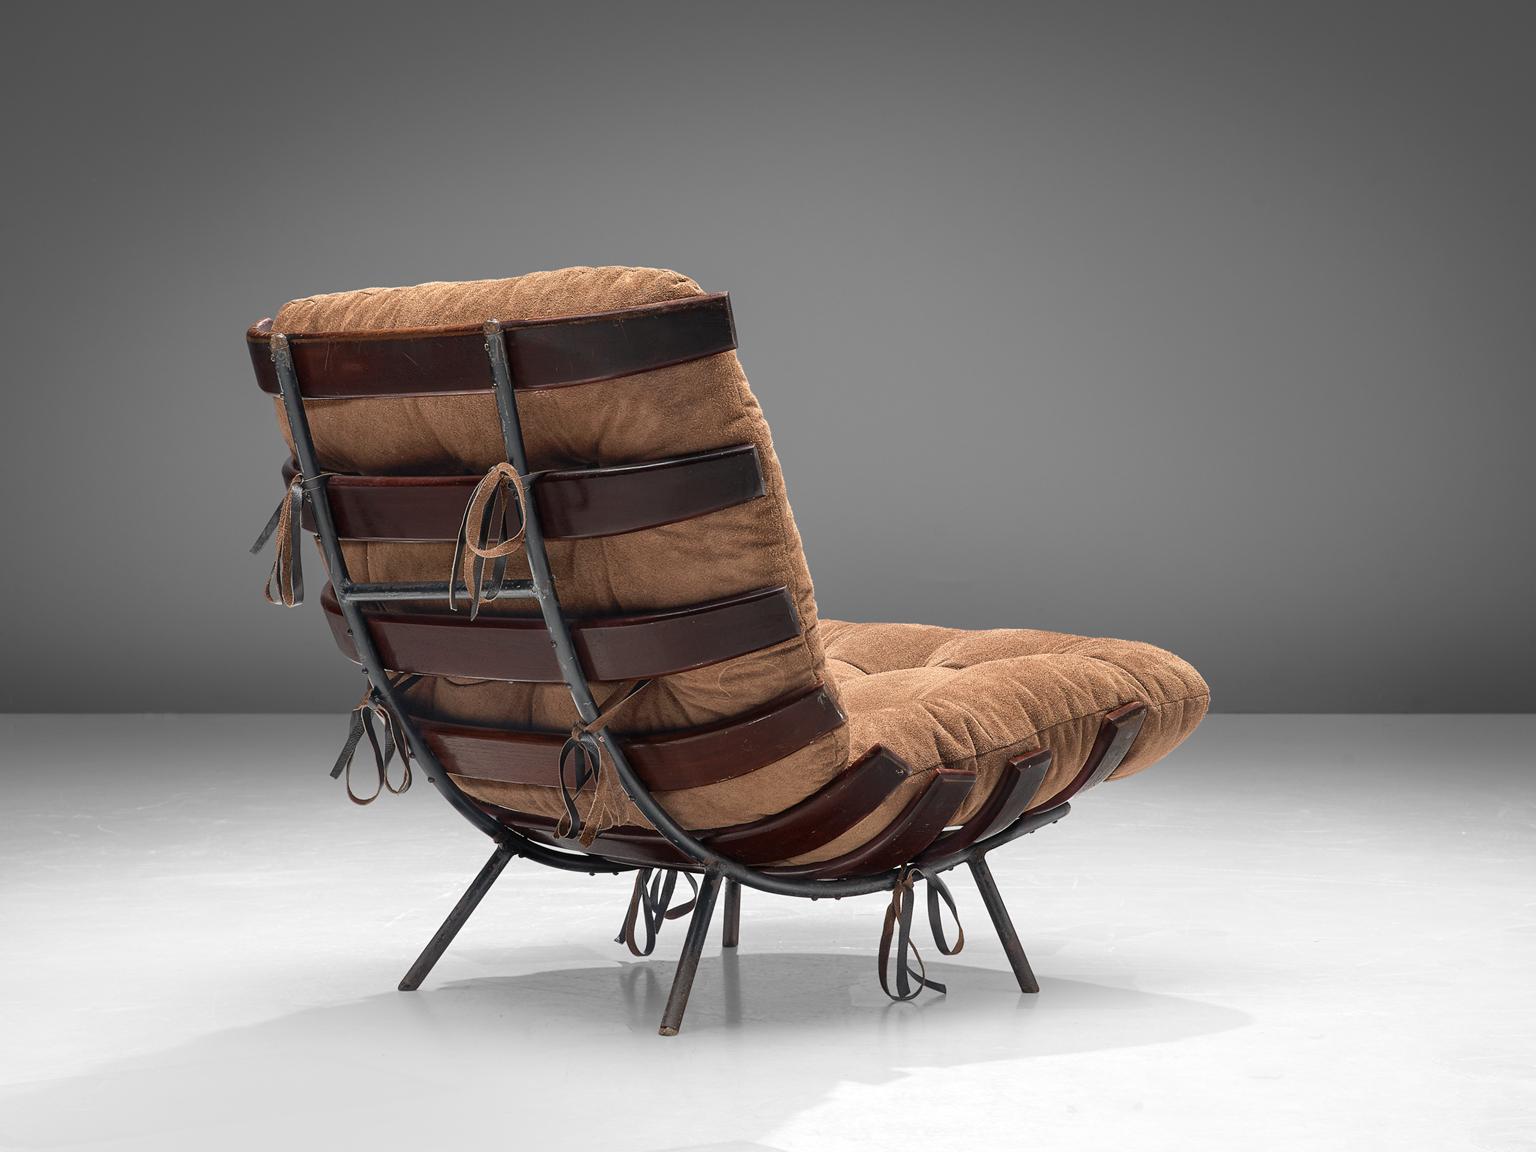 Martin Eisler & Carlo Hauner for Forma, 'Costela' chair, fabric, rosewood and metal, Brazil, 1950s. 

The phenomenal 'Costela' chair by Brazilian designer duo Eisler and Hauner. The chairs thanks its name to its rosewood, rhythmic frame that